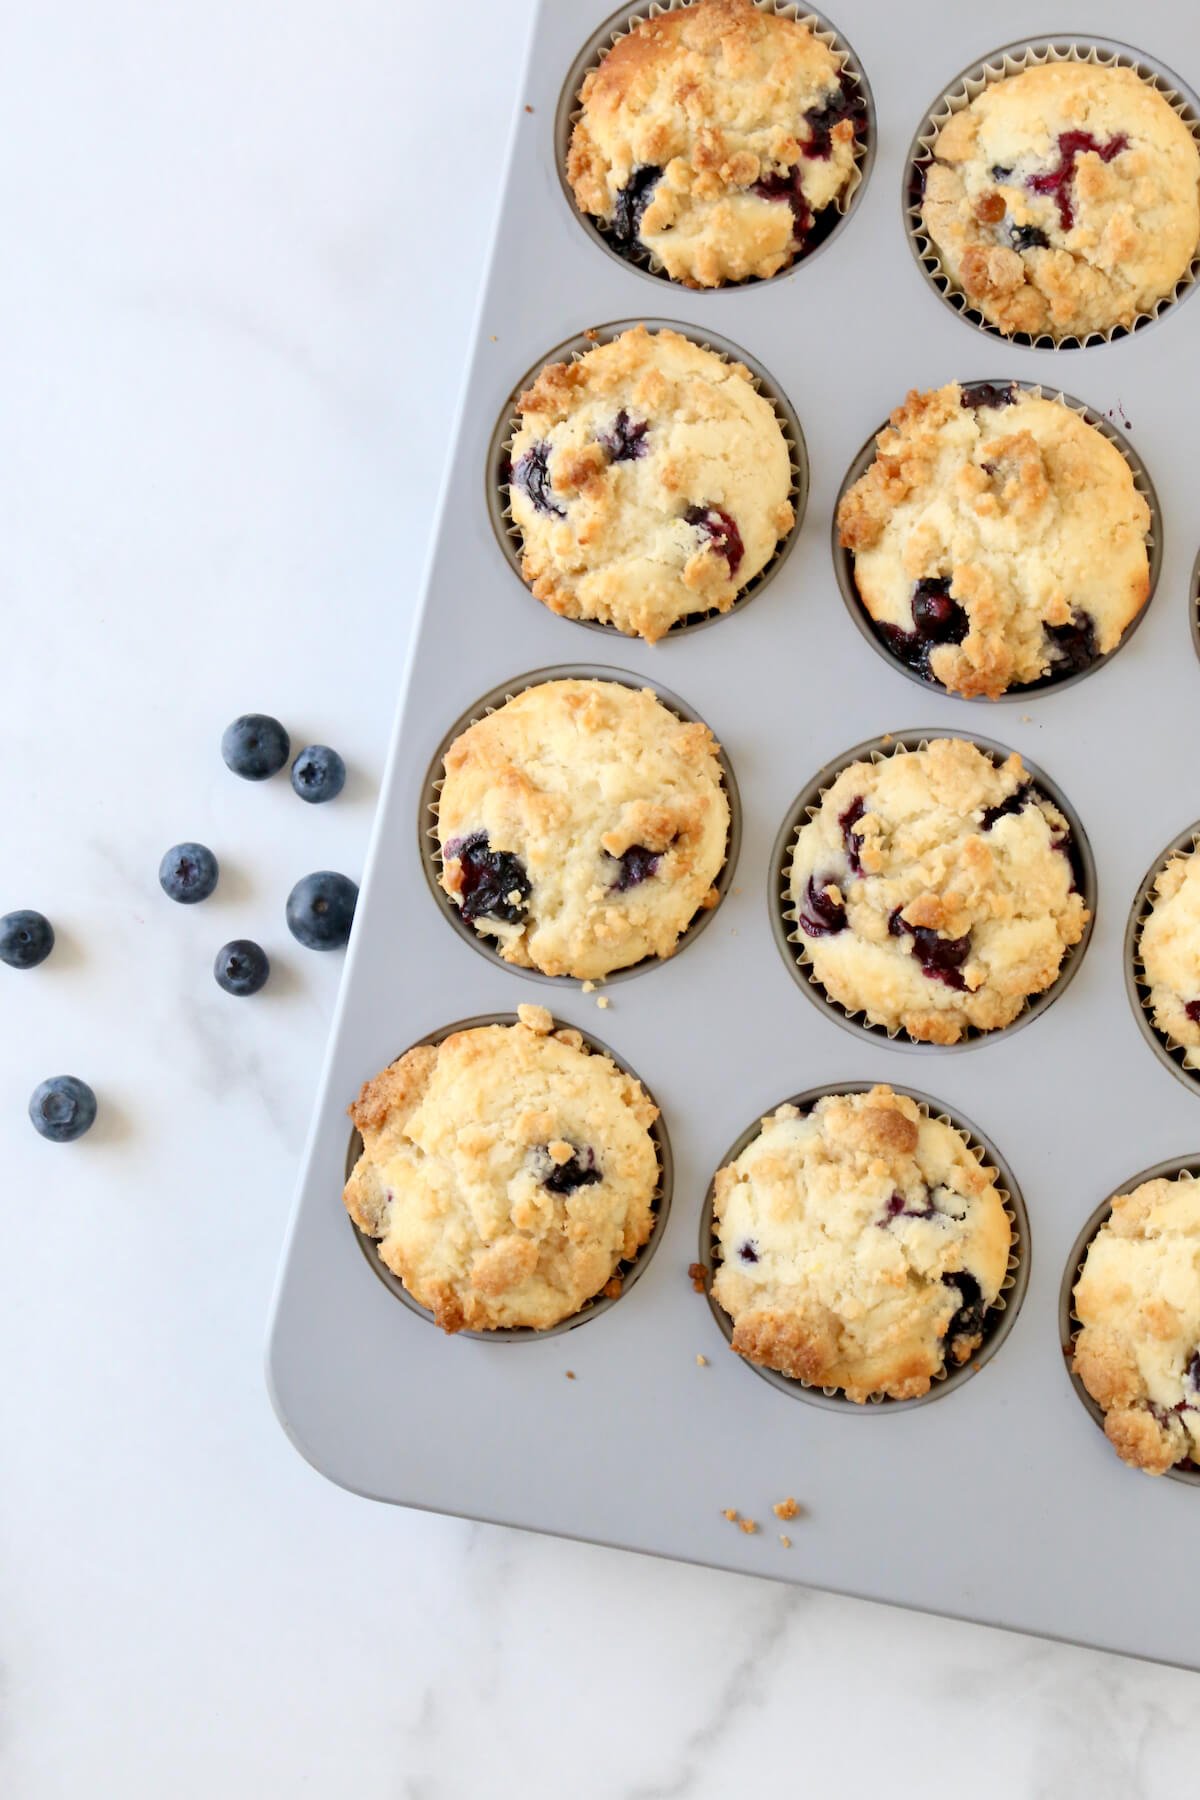 A muffin pan filled with baked muffins and blueberries sitting next to it.  